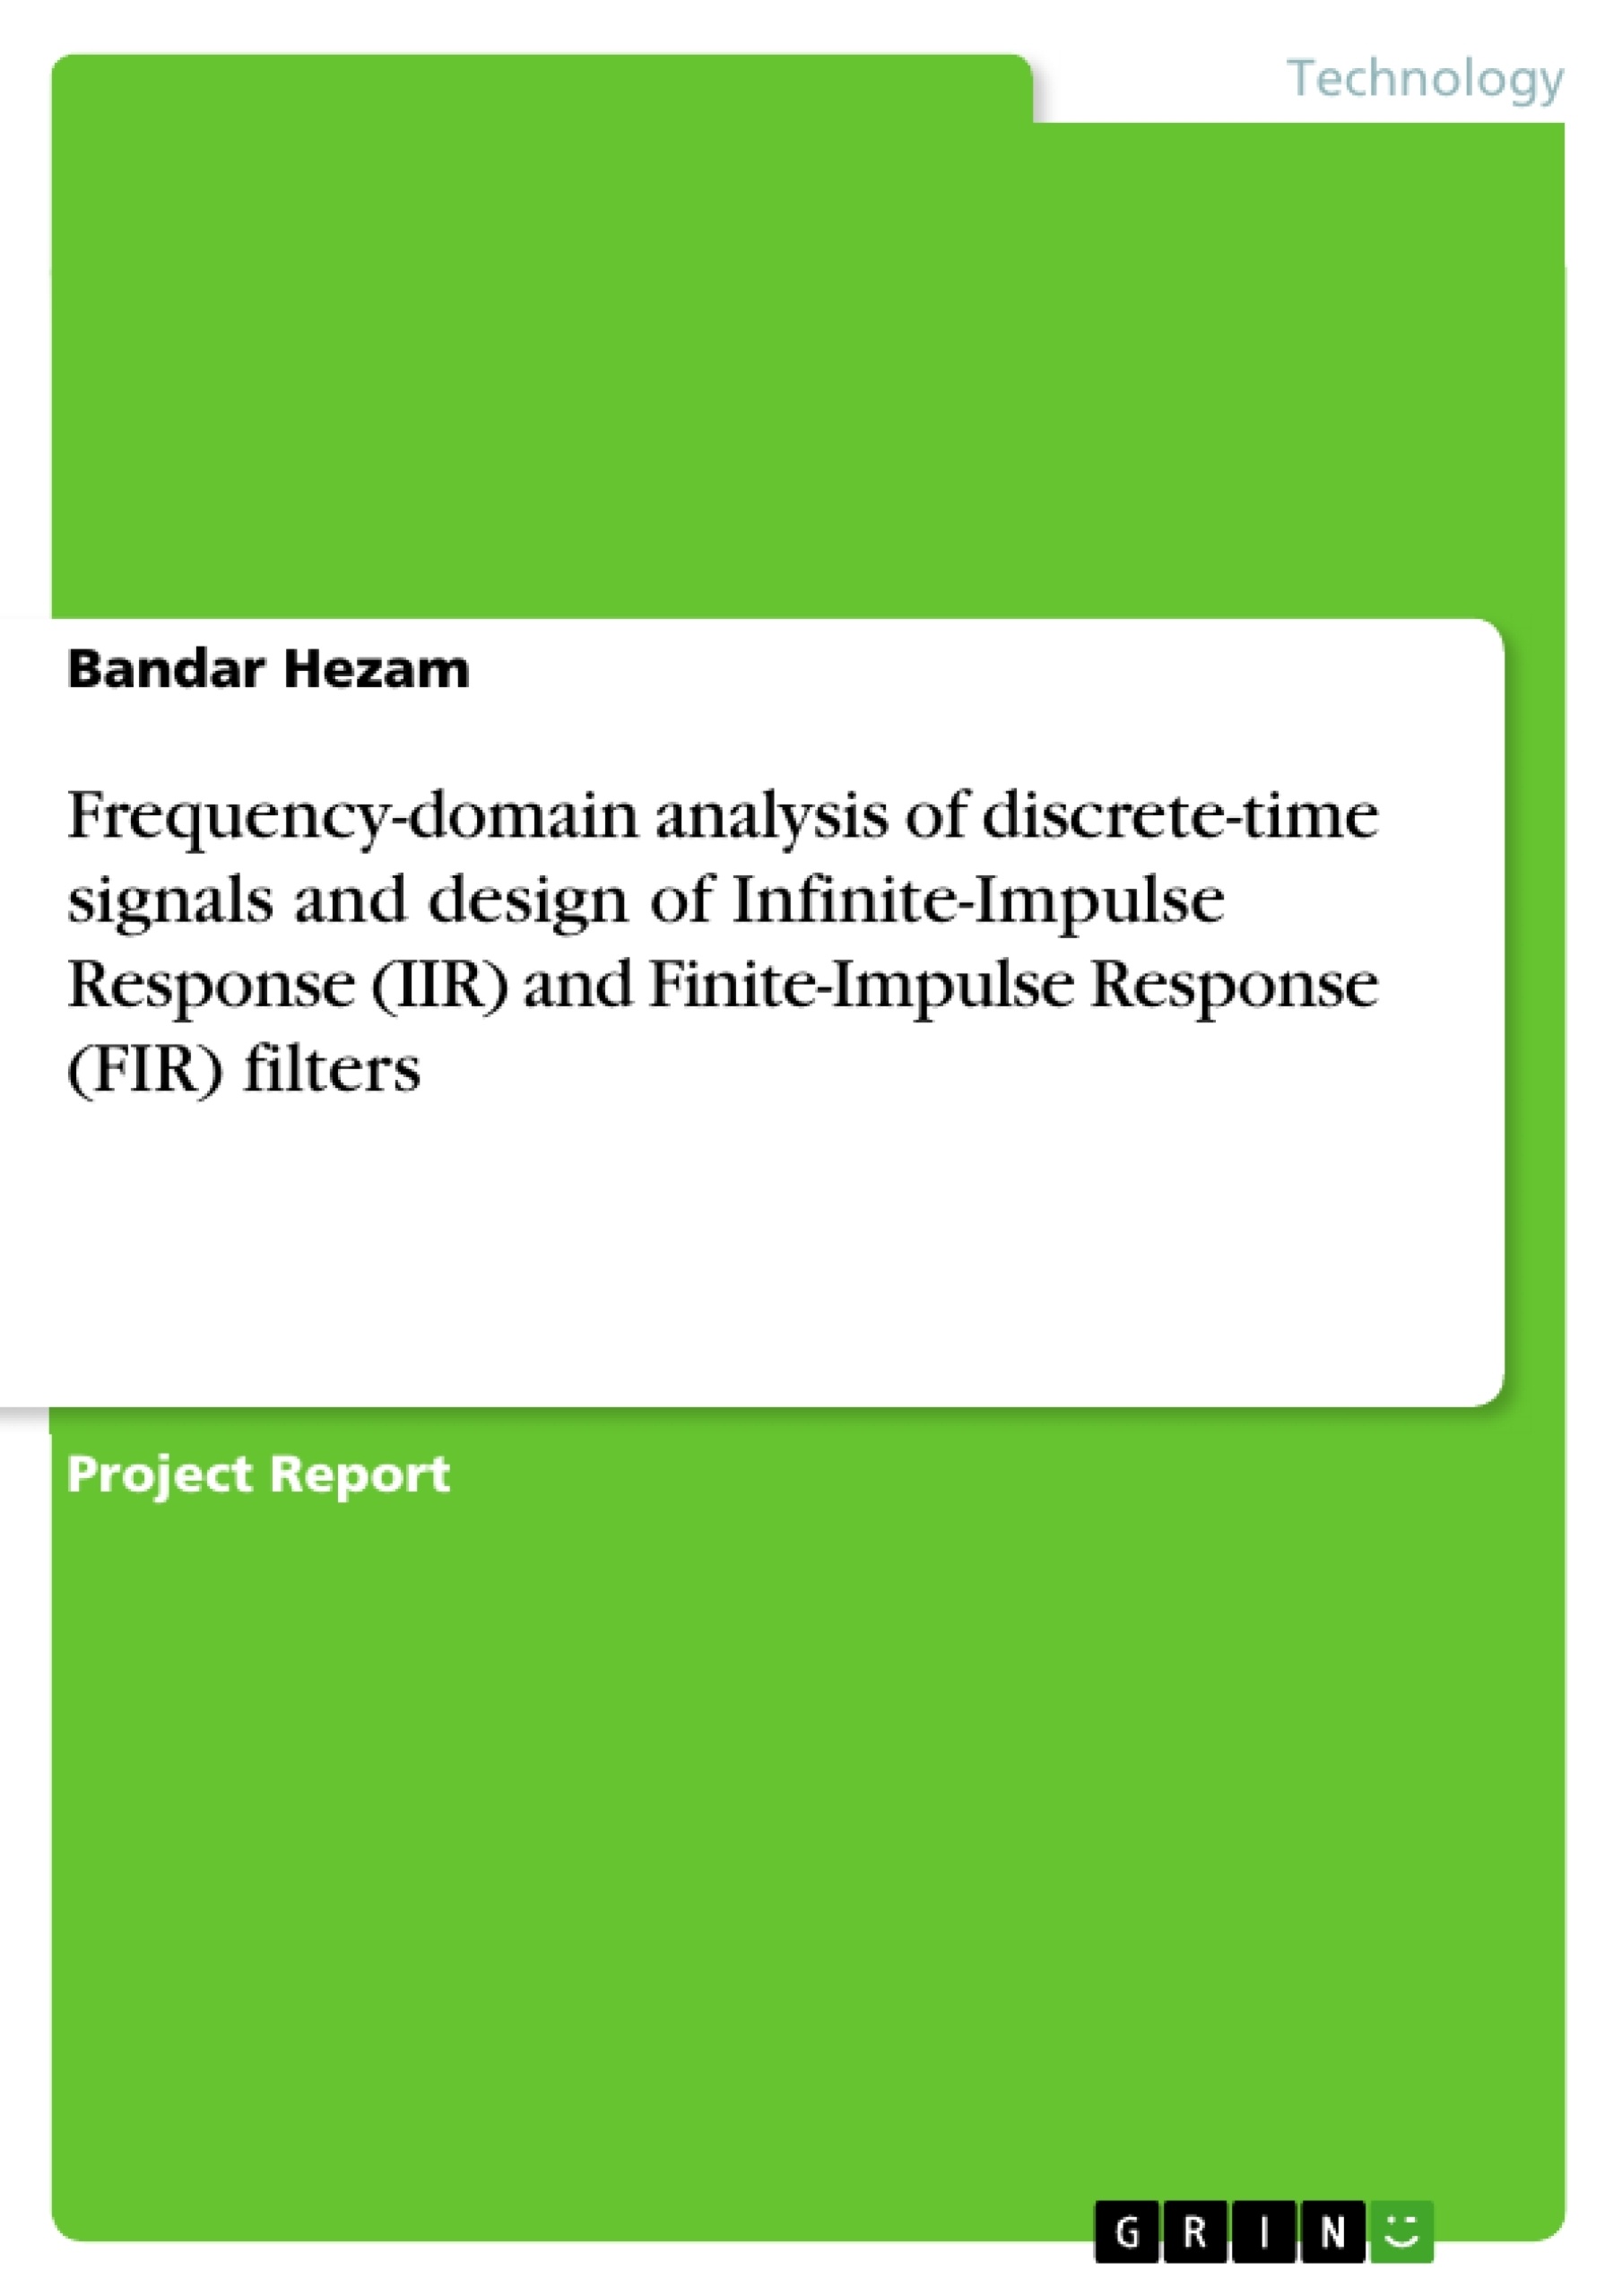 Title: Frequency-domain analysis of discrete-time signals and design of Infinite-Impulse Response (IIR) and Finite-Impulse Response (FIR) filters